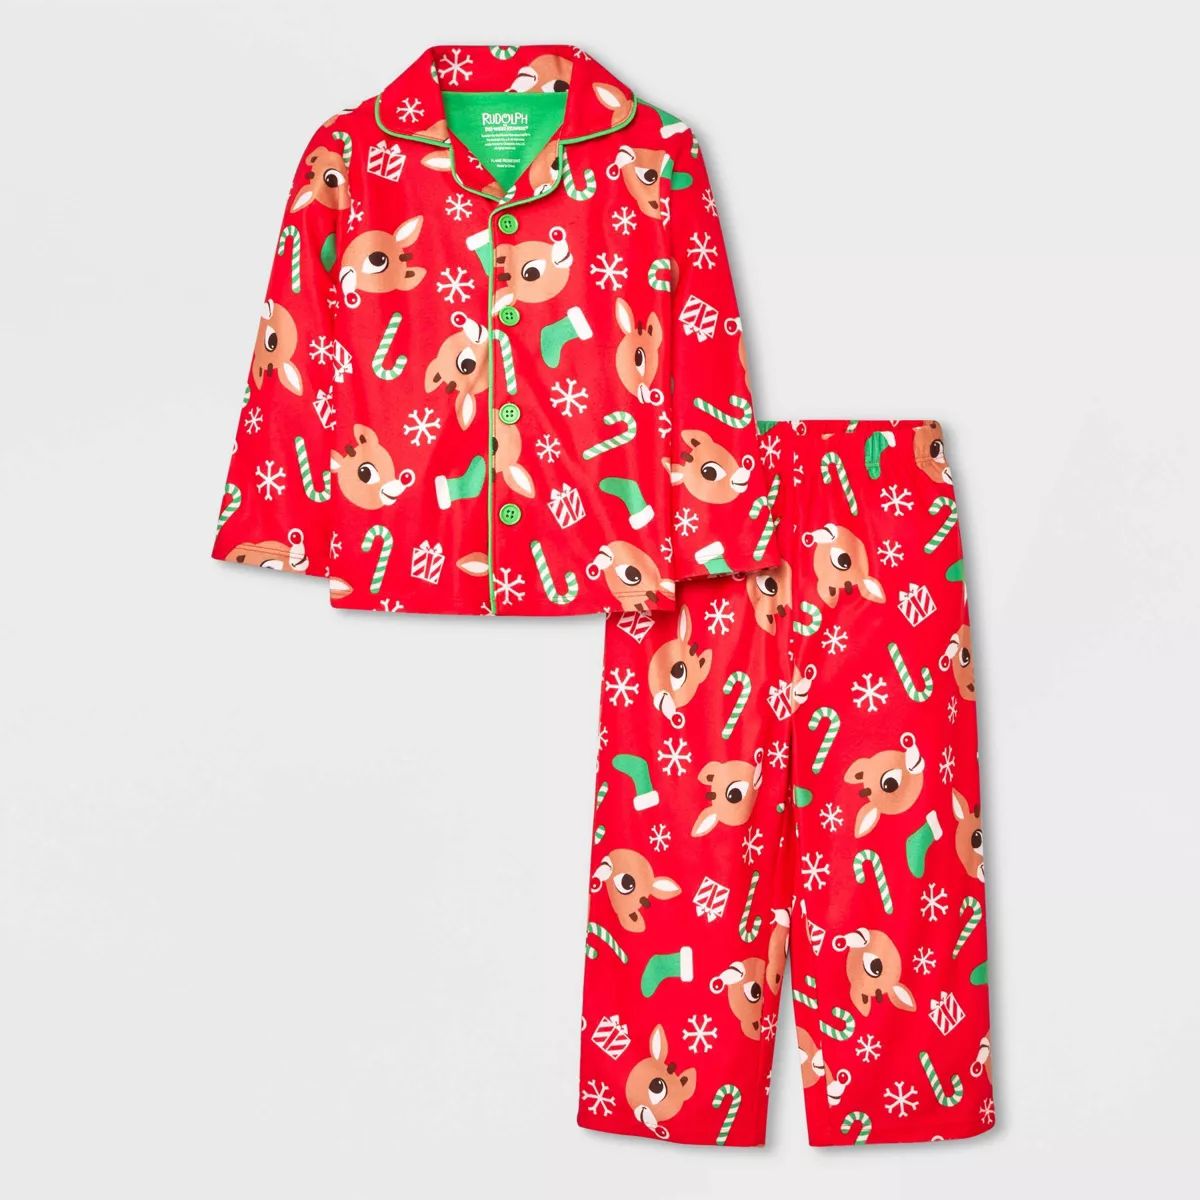 Toddler Rudolph the Red-Nosed Reindeer Holiday Coat Pajama Set - Red | Target